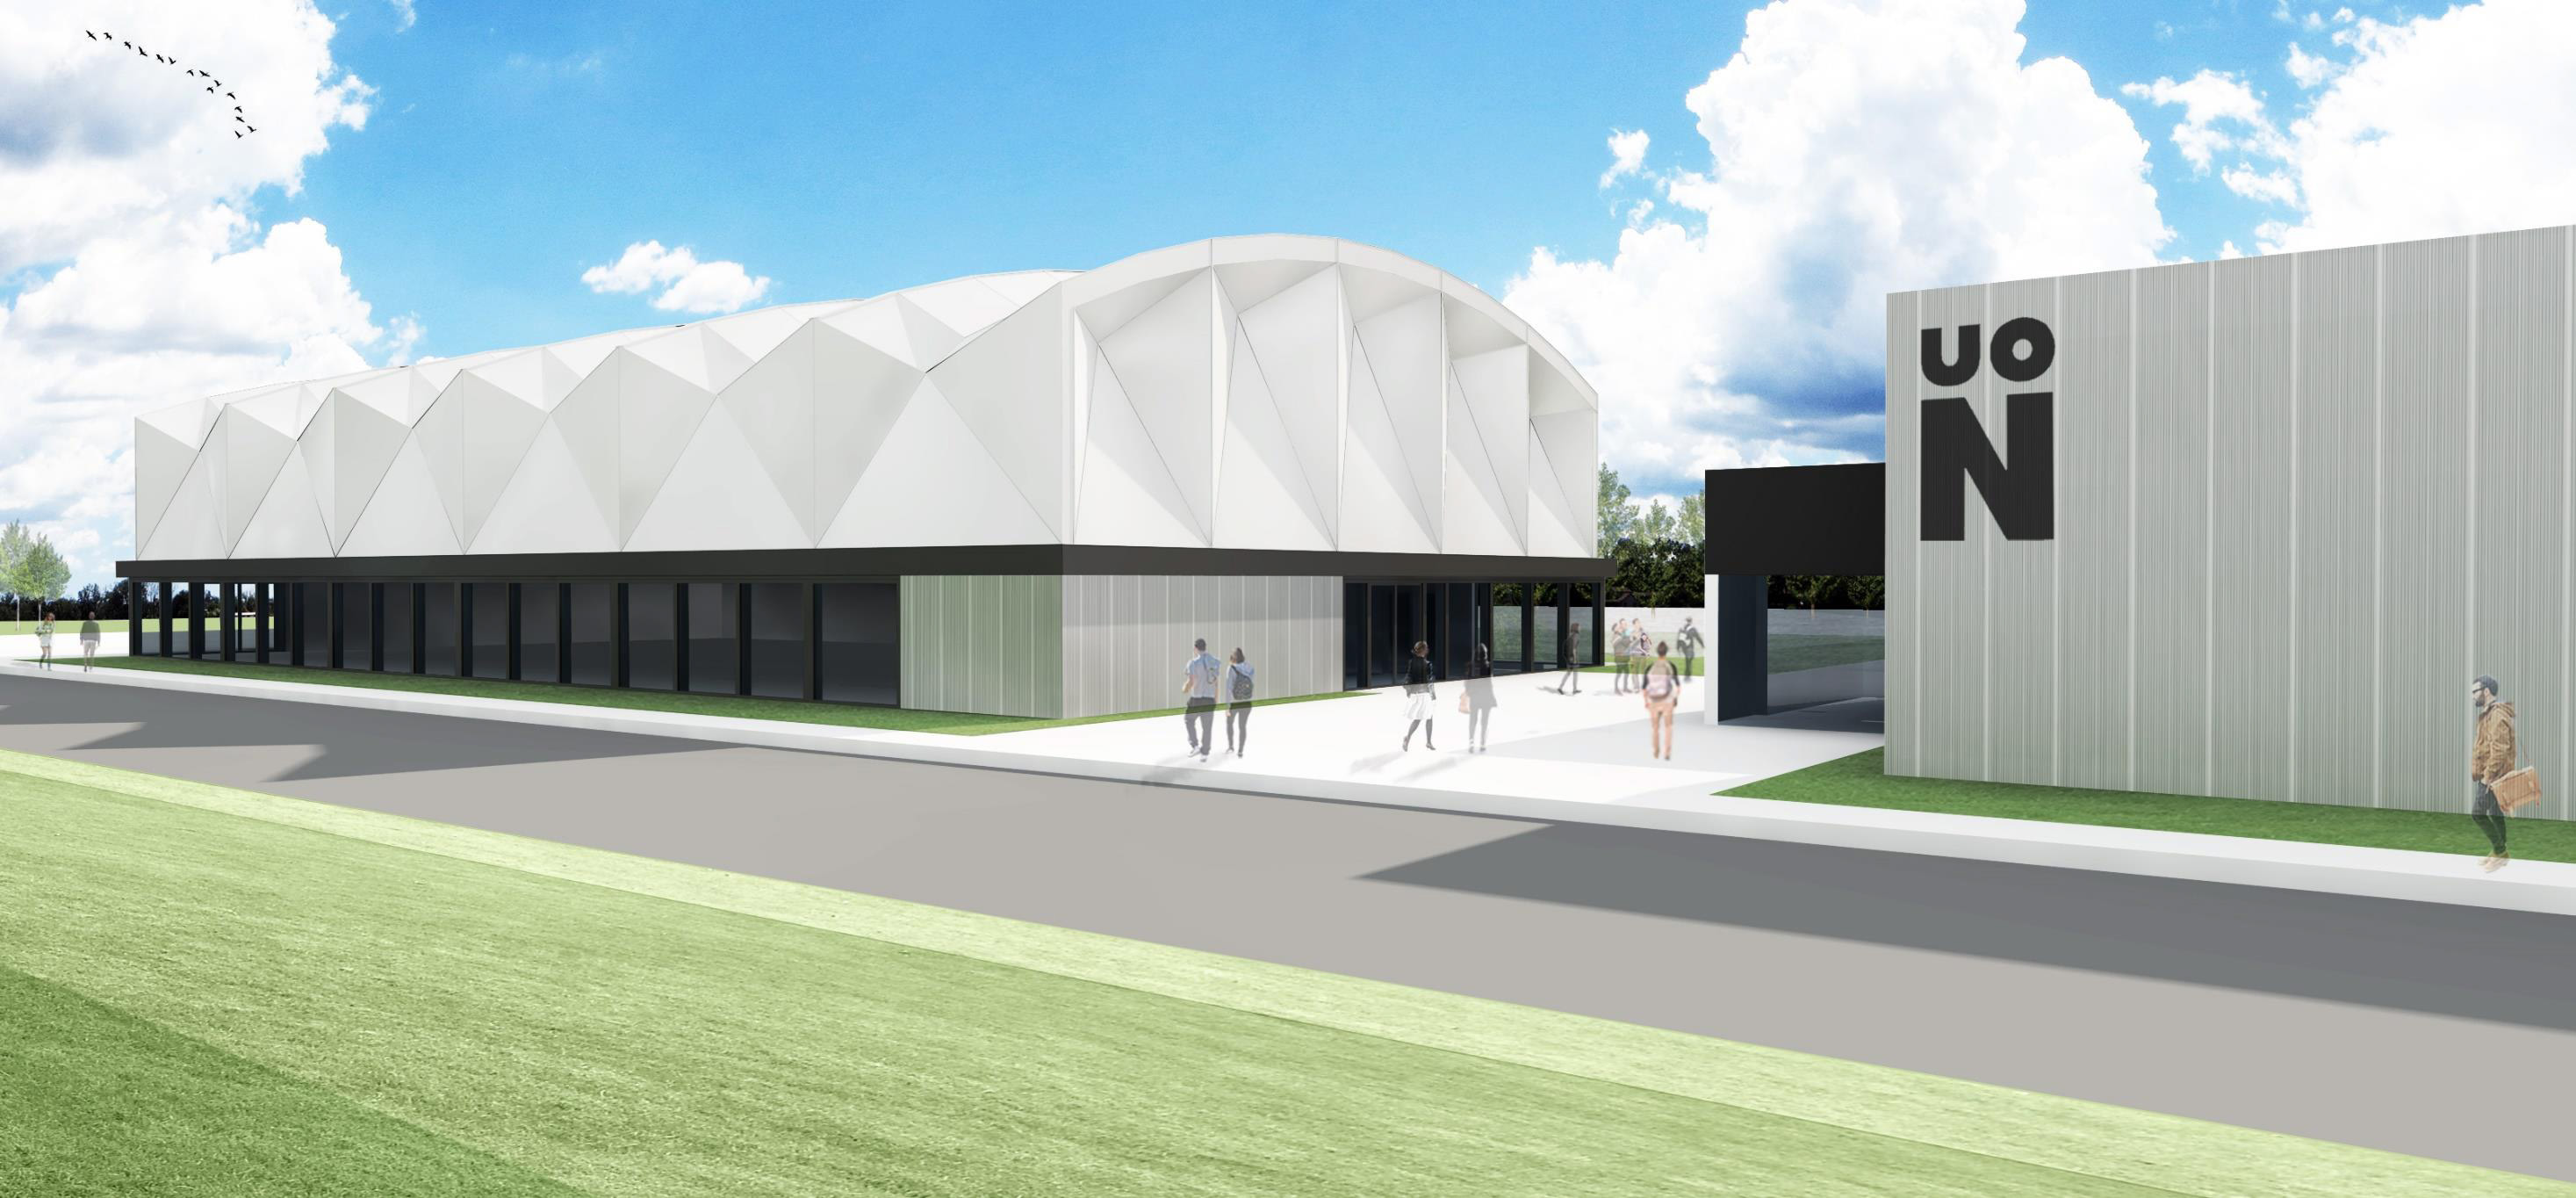 Sports dome - an artist's impression